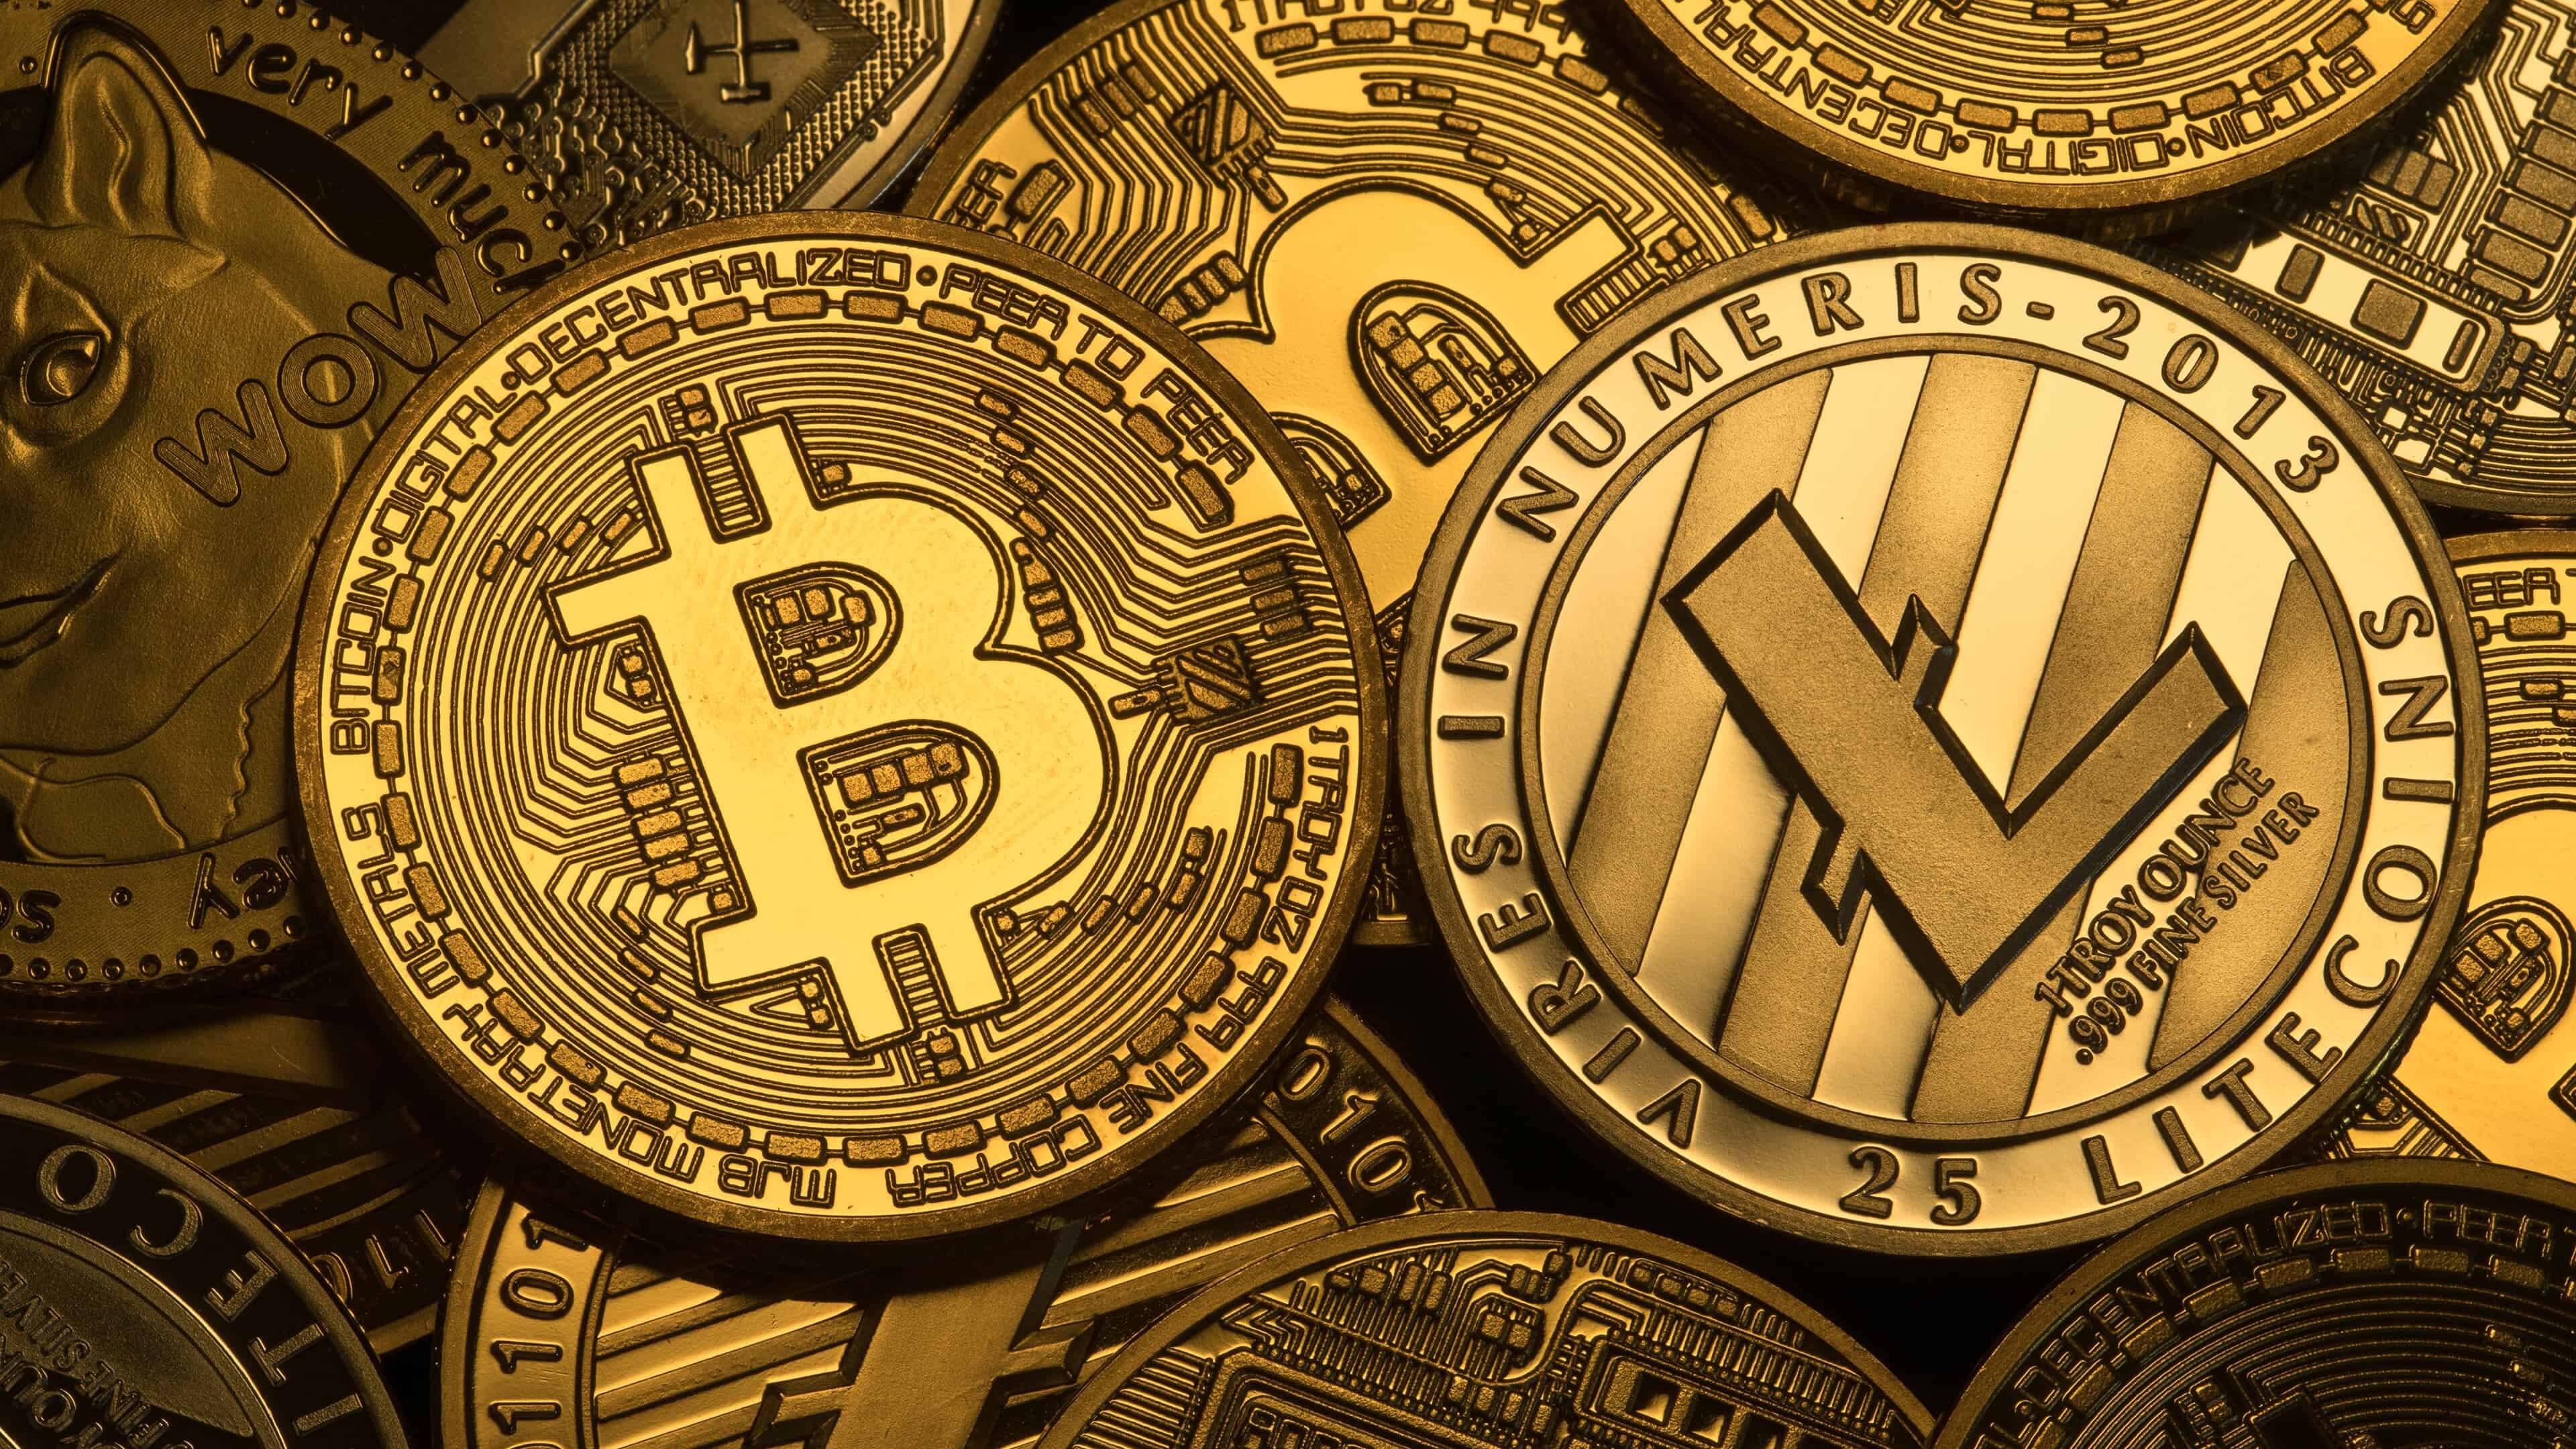 Bitcoin: A virtual currency designed to act as money, Cryptocurrency coins. 3840x2160 4K Wallpaper.